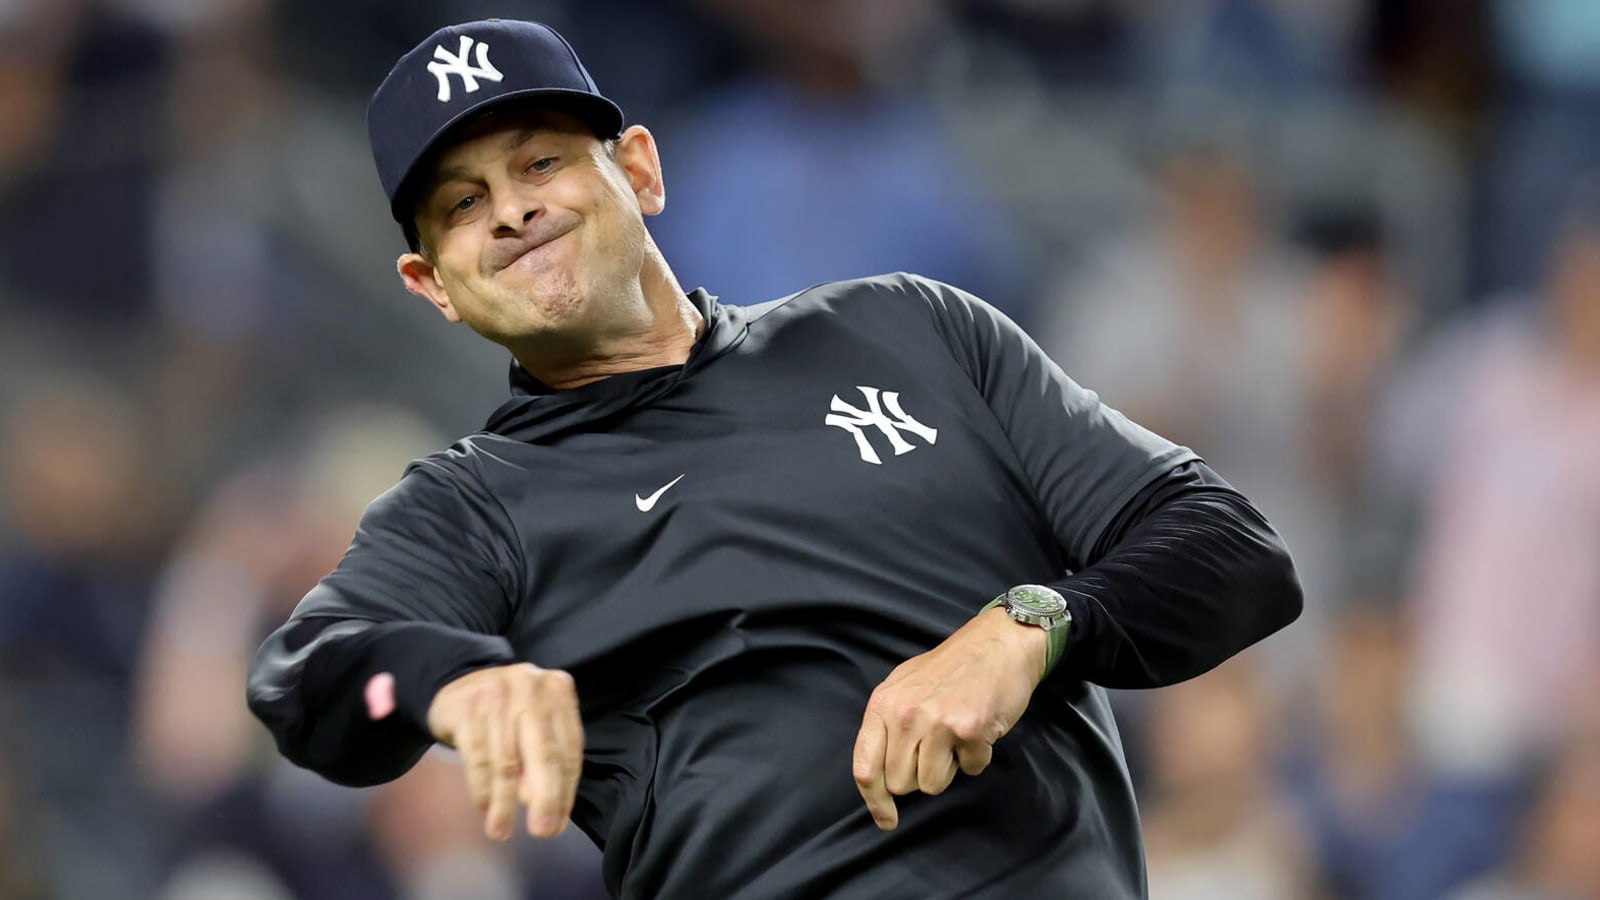 Aaron Boone picked by Yankees as next manager – The Denver Post